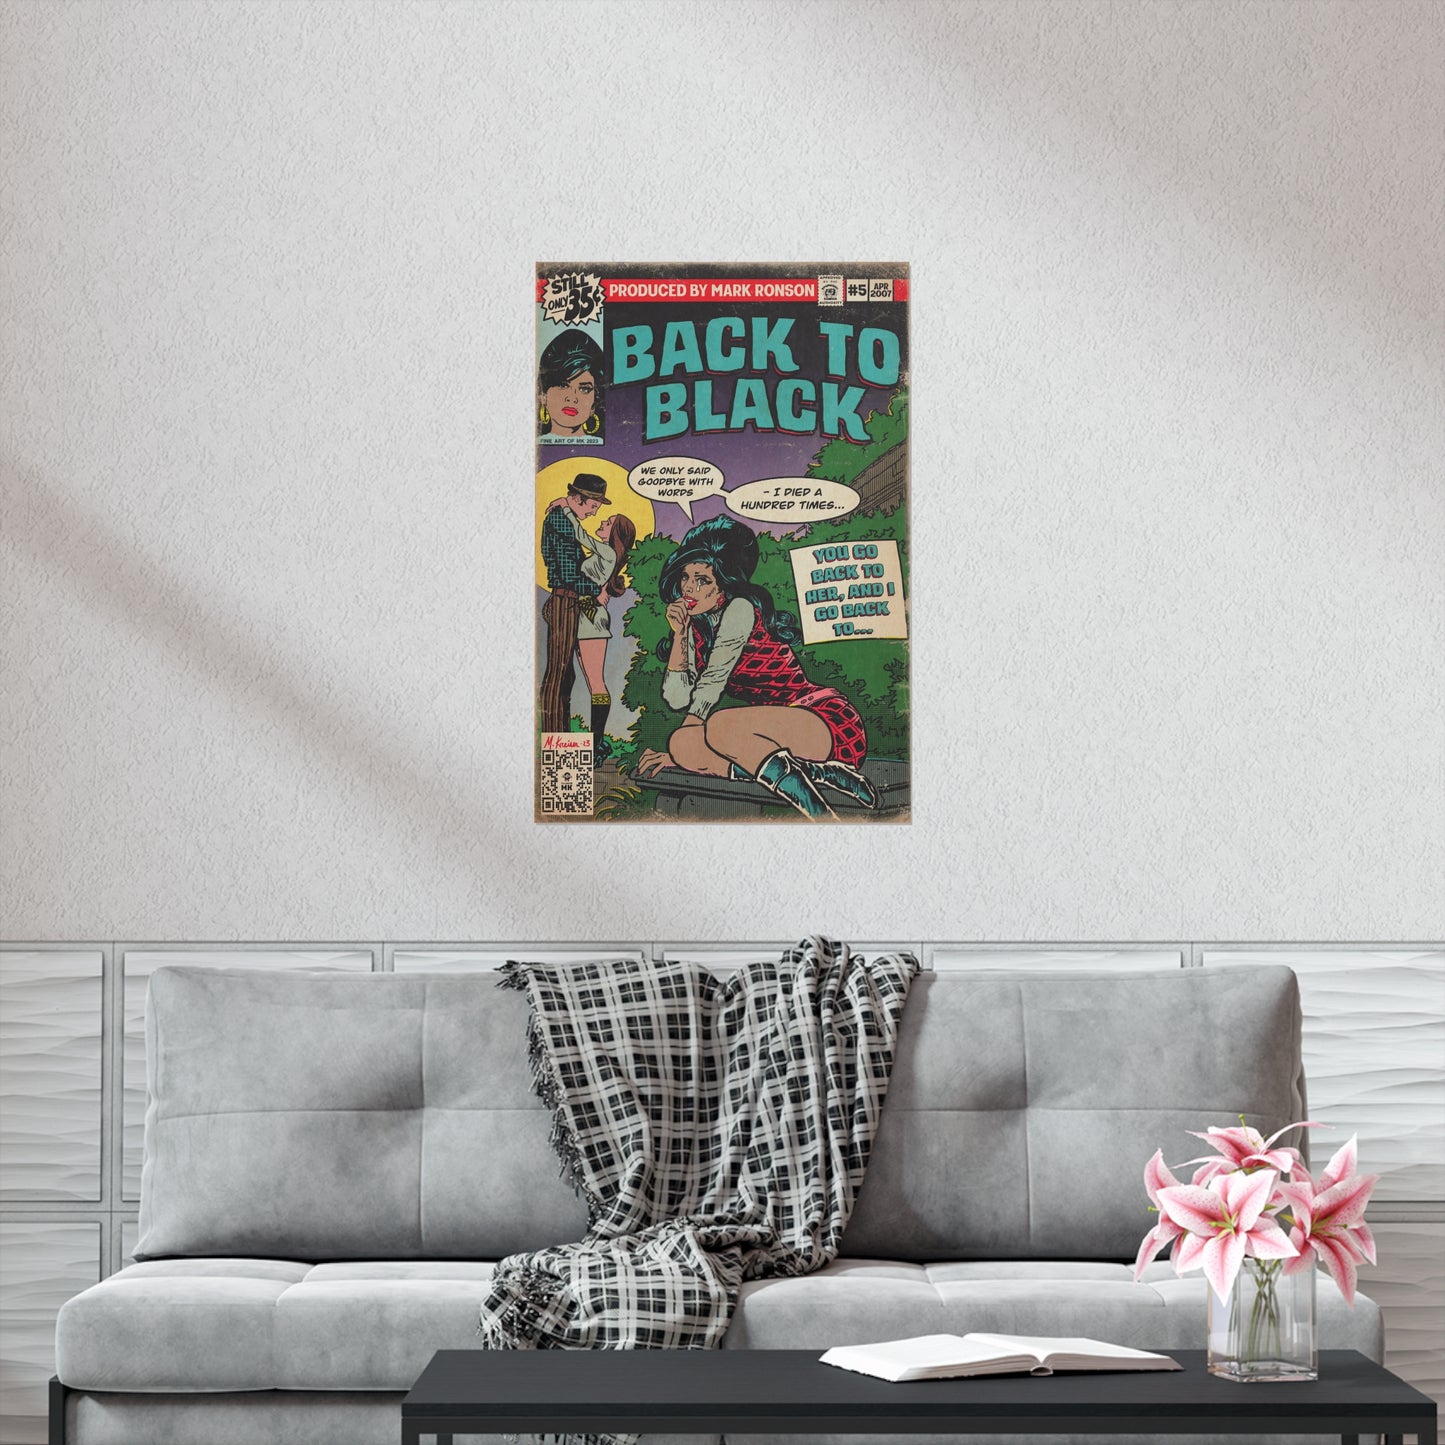 Amy Winehouse - Back to Black - Premium Matte Vertical Poster